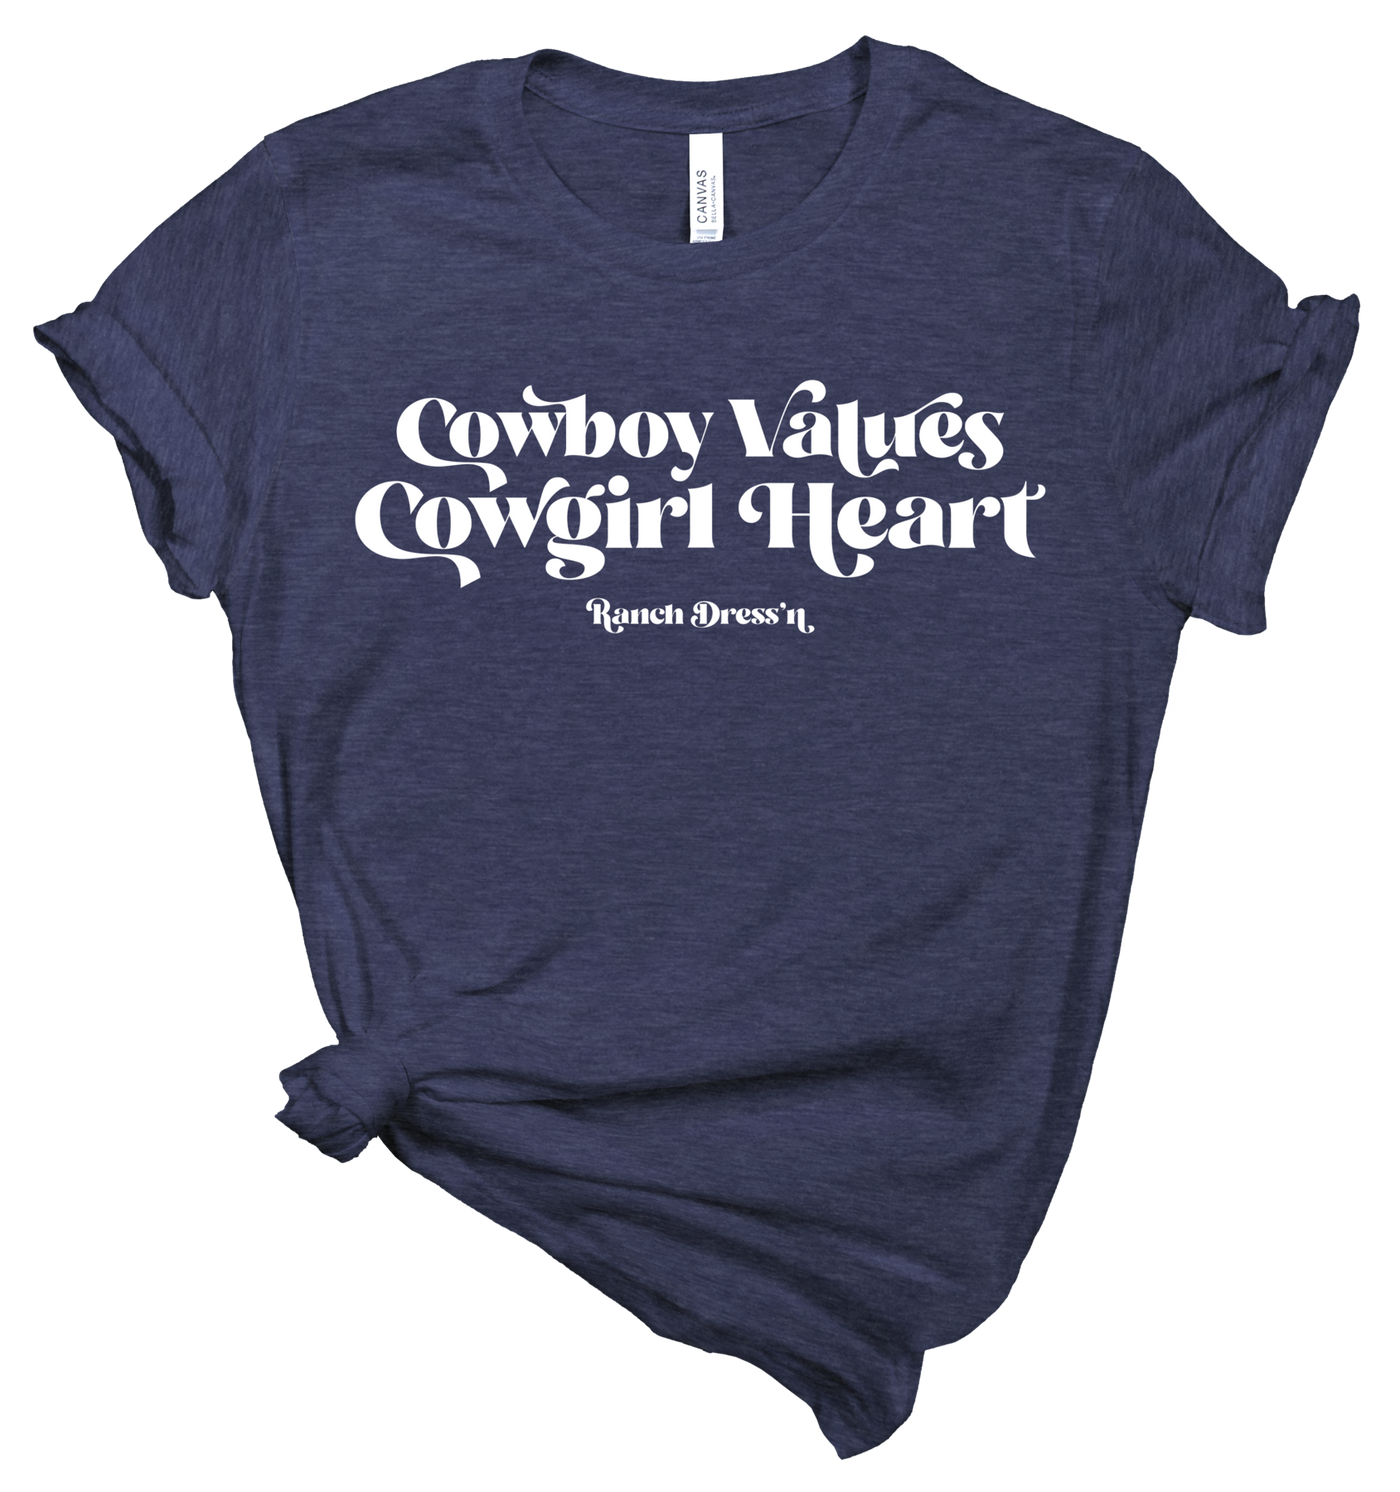 Cowboy Values Cowgirl Heart Tee